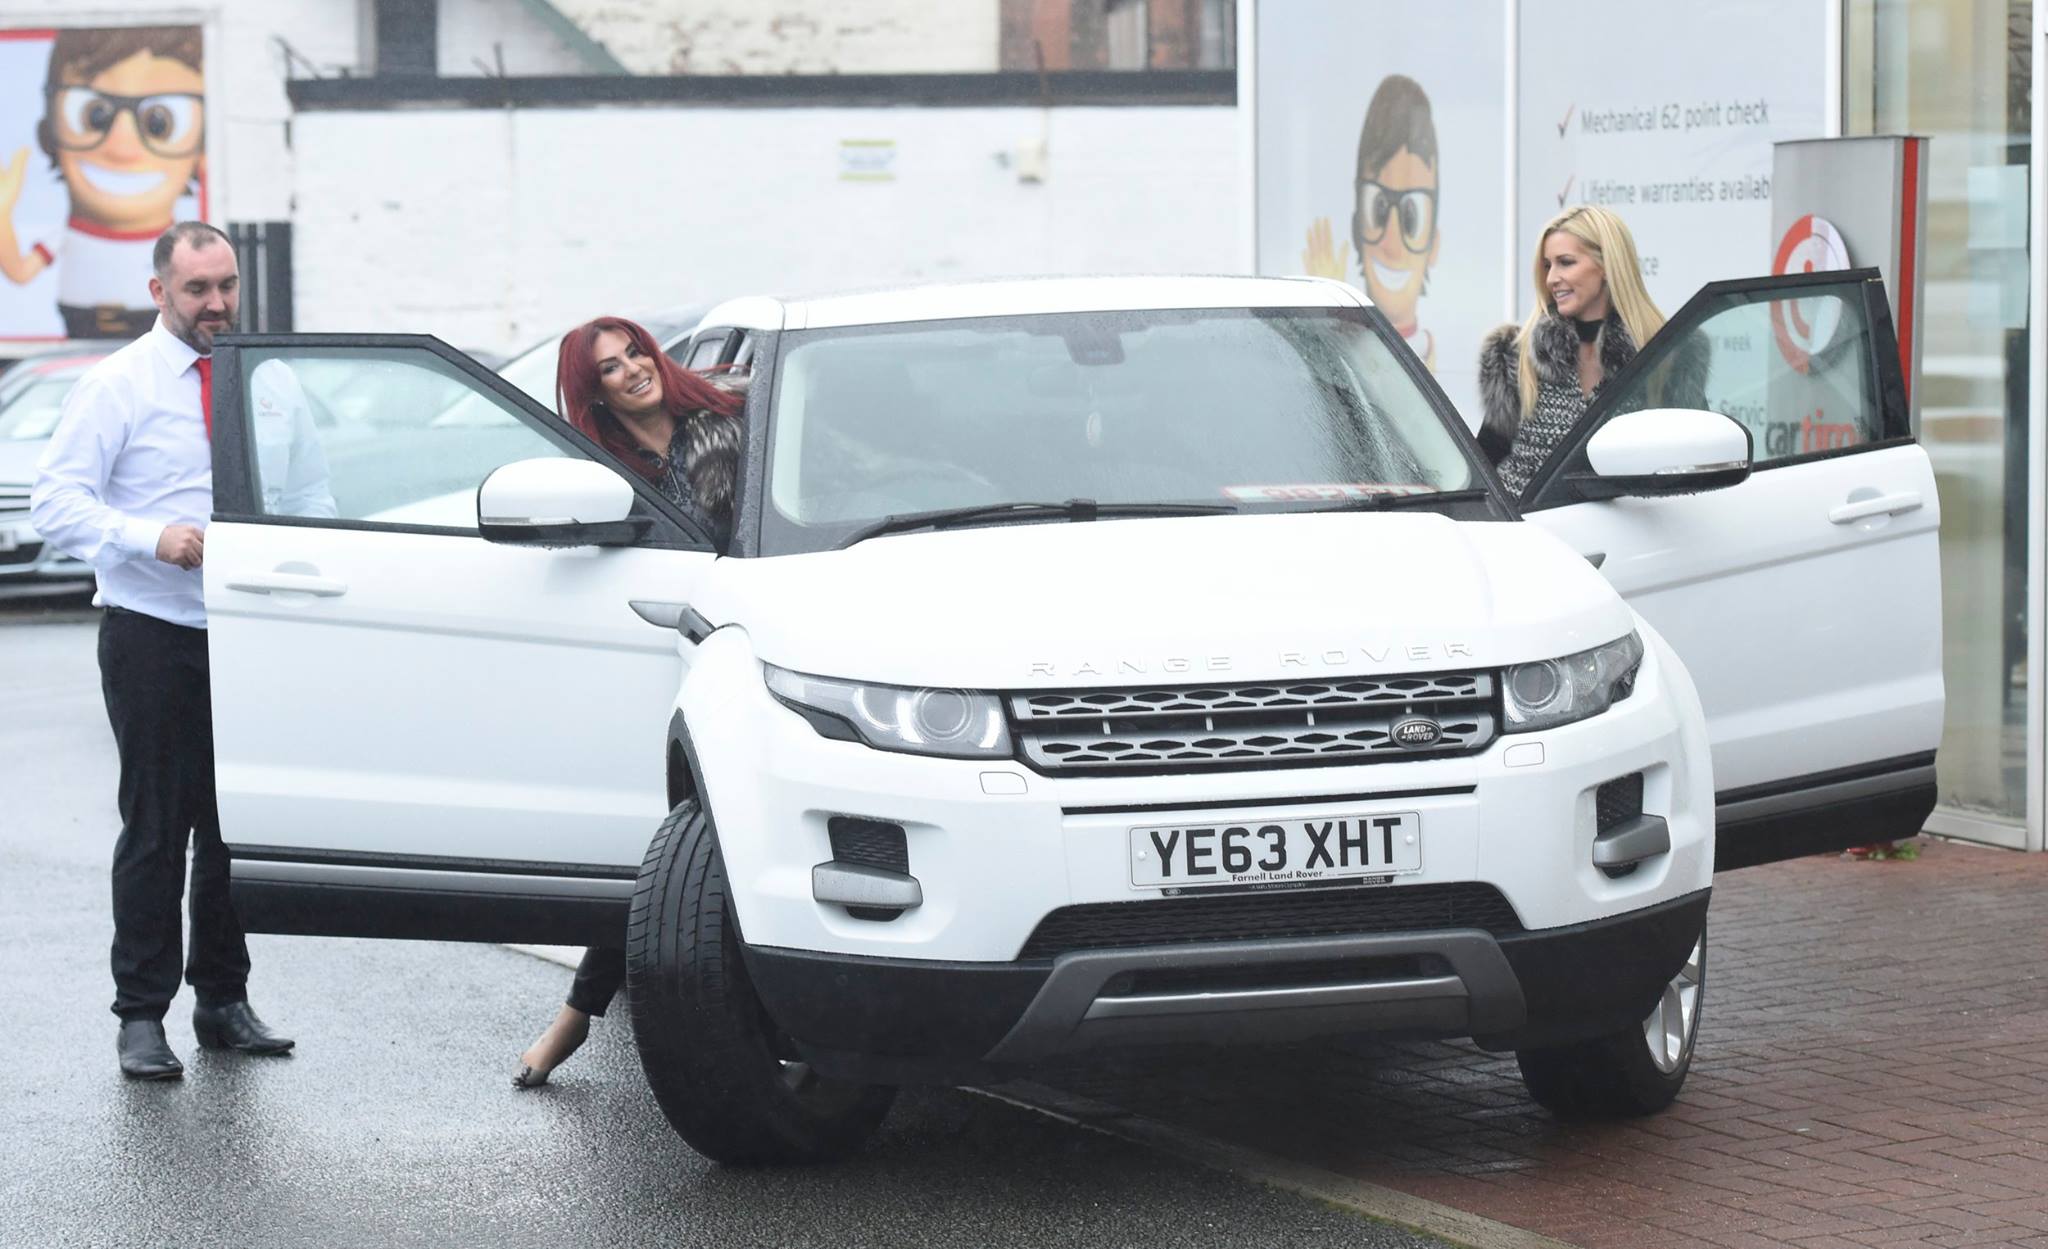 Main image for post: Real Housewives of Cheshire go Christmas car shopping at cartime